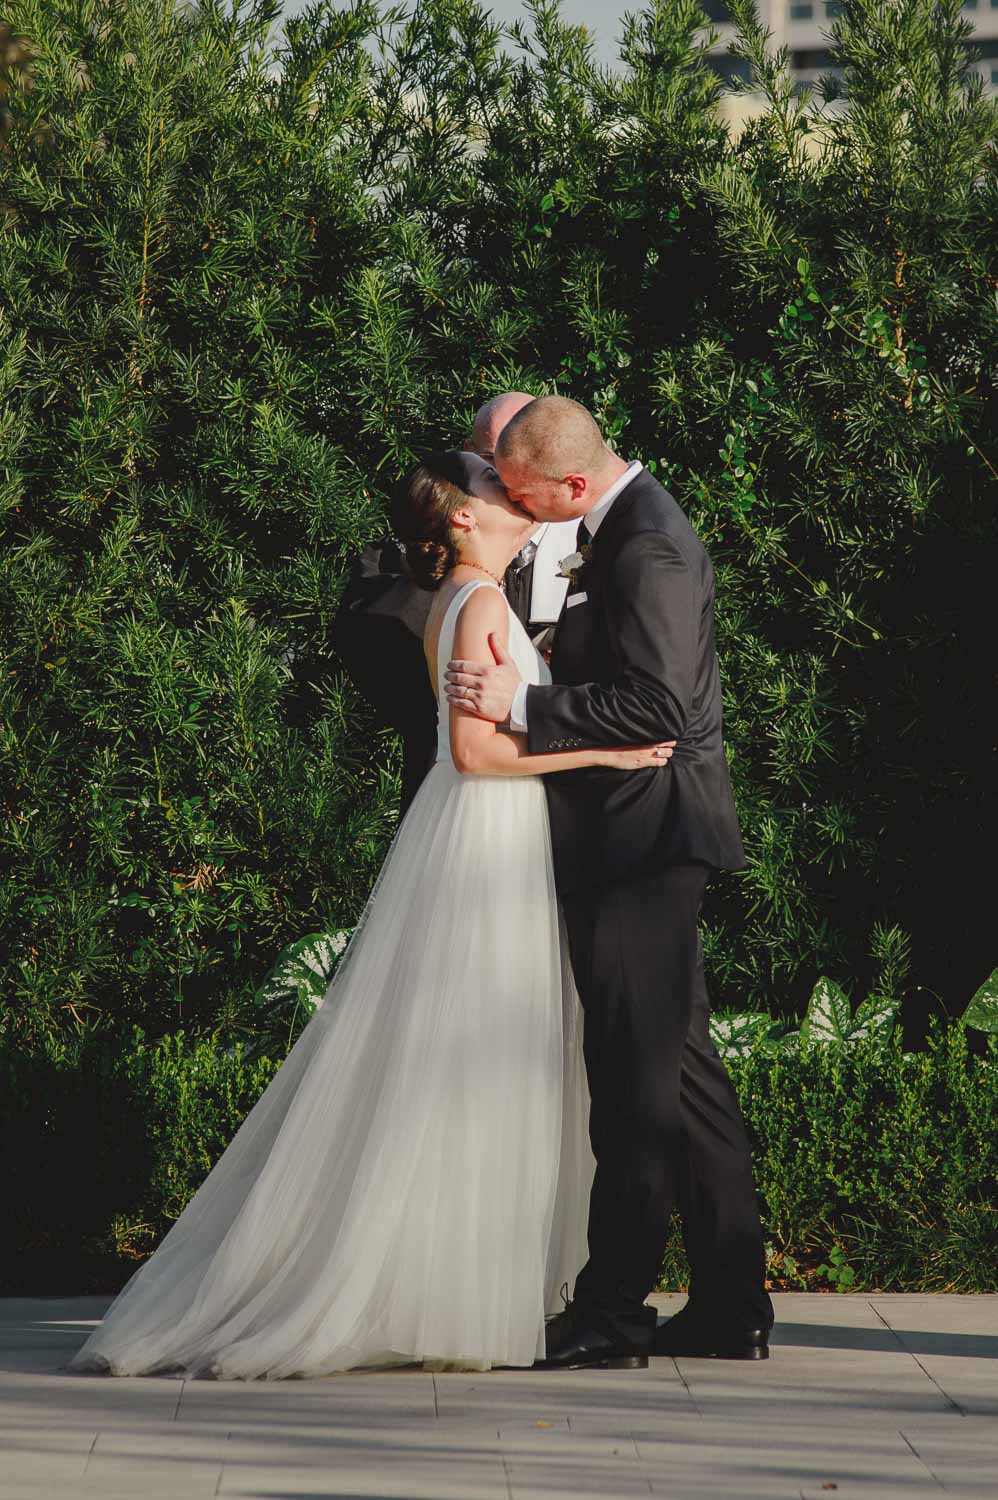 First kiss at end of ceremony during a very hot fall day at Cherie Flores Garden Pavilion Wedding Hermann Park Houston Texas-Philip Thomas